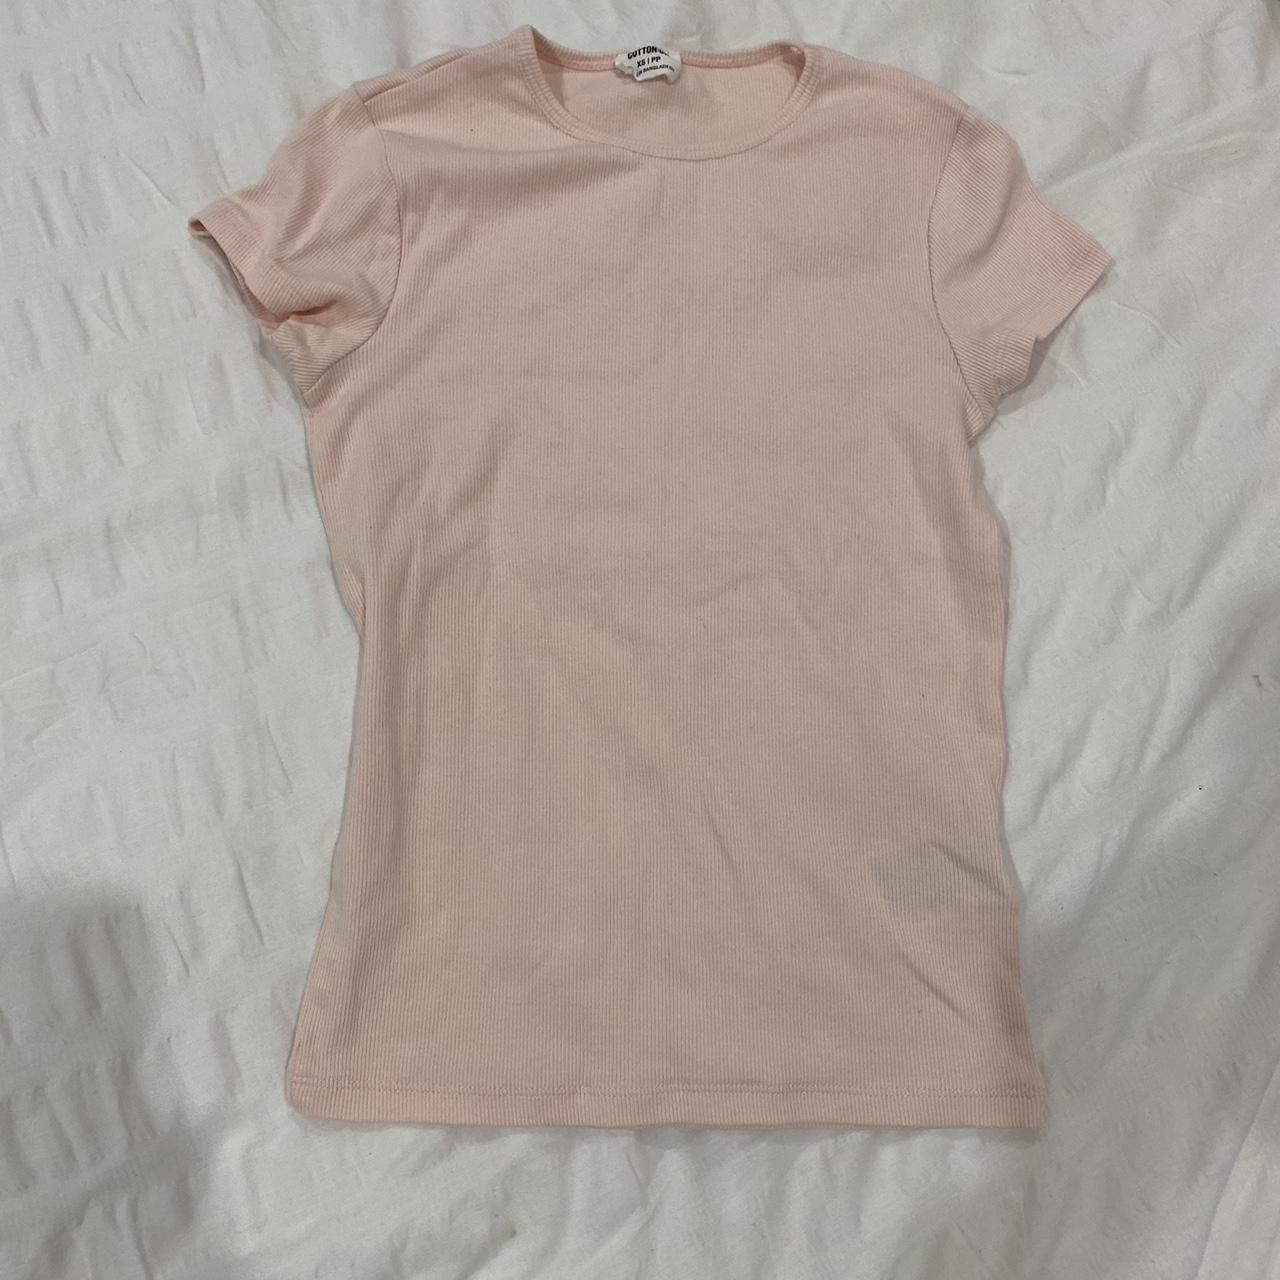 Cotton on Pink ribbed fitted tee super cut pink... - Depop